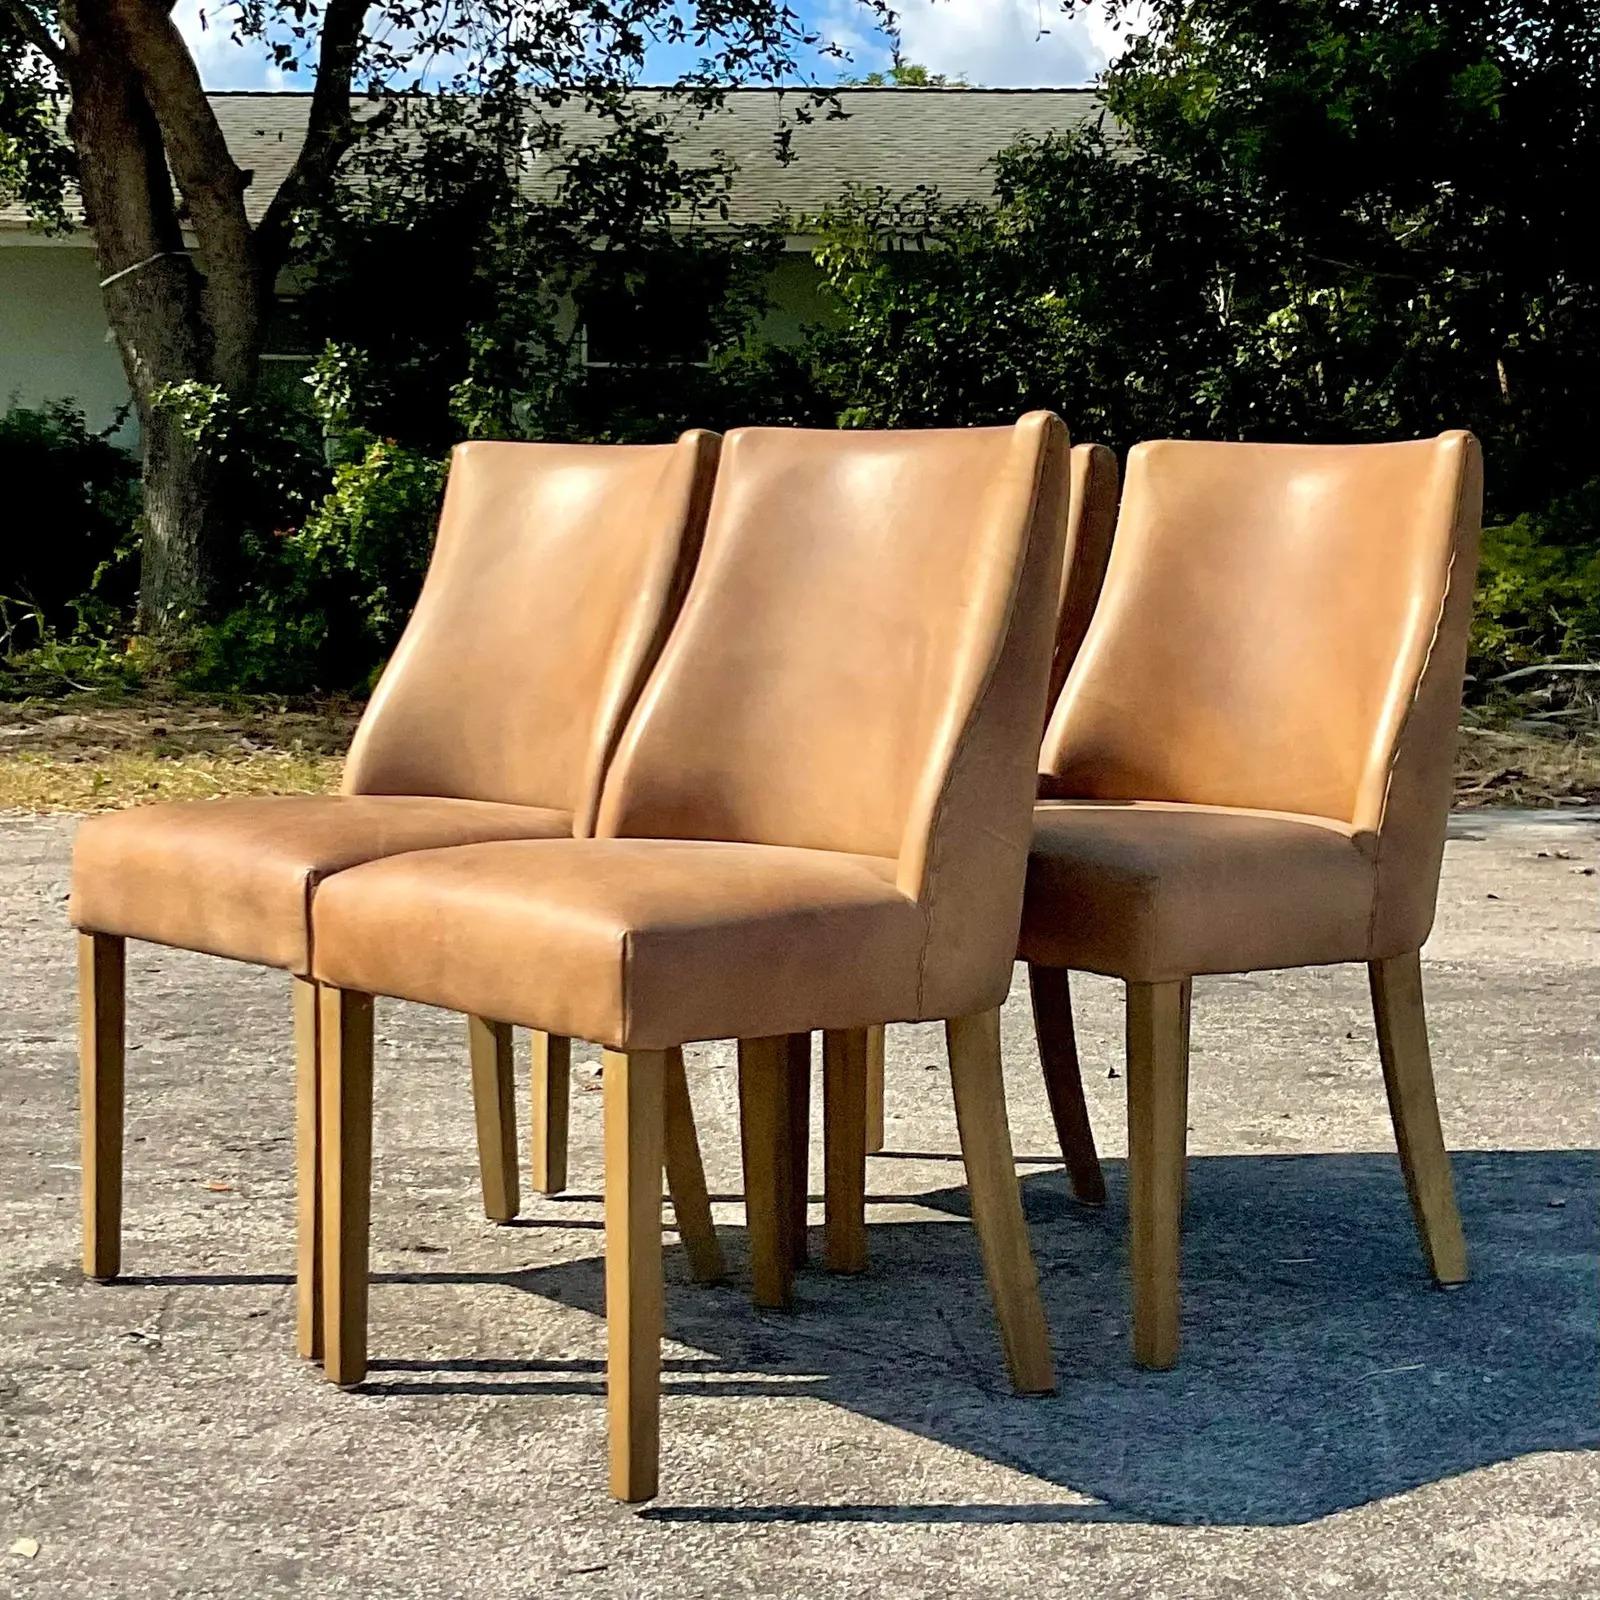 A fabulous set of custom Restoration Hardware dining chairs. Custom leather upholstery with nailhead trim. The popular “Ella” design. Acquired from a Palm Beach estate.